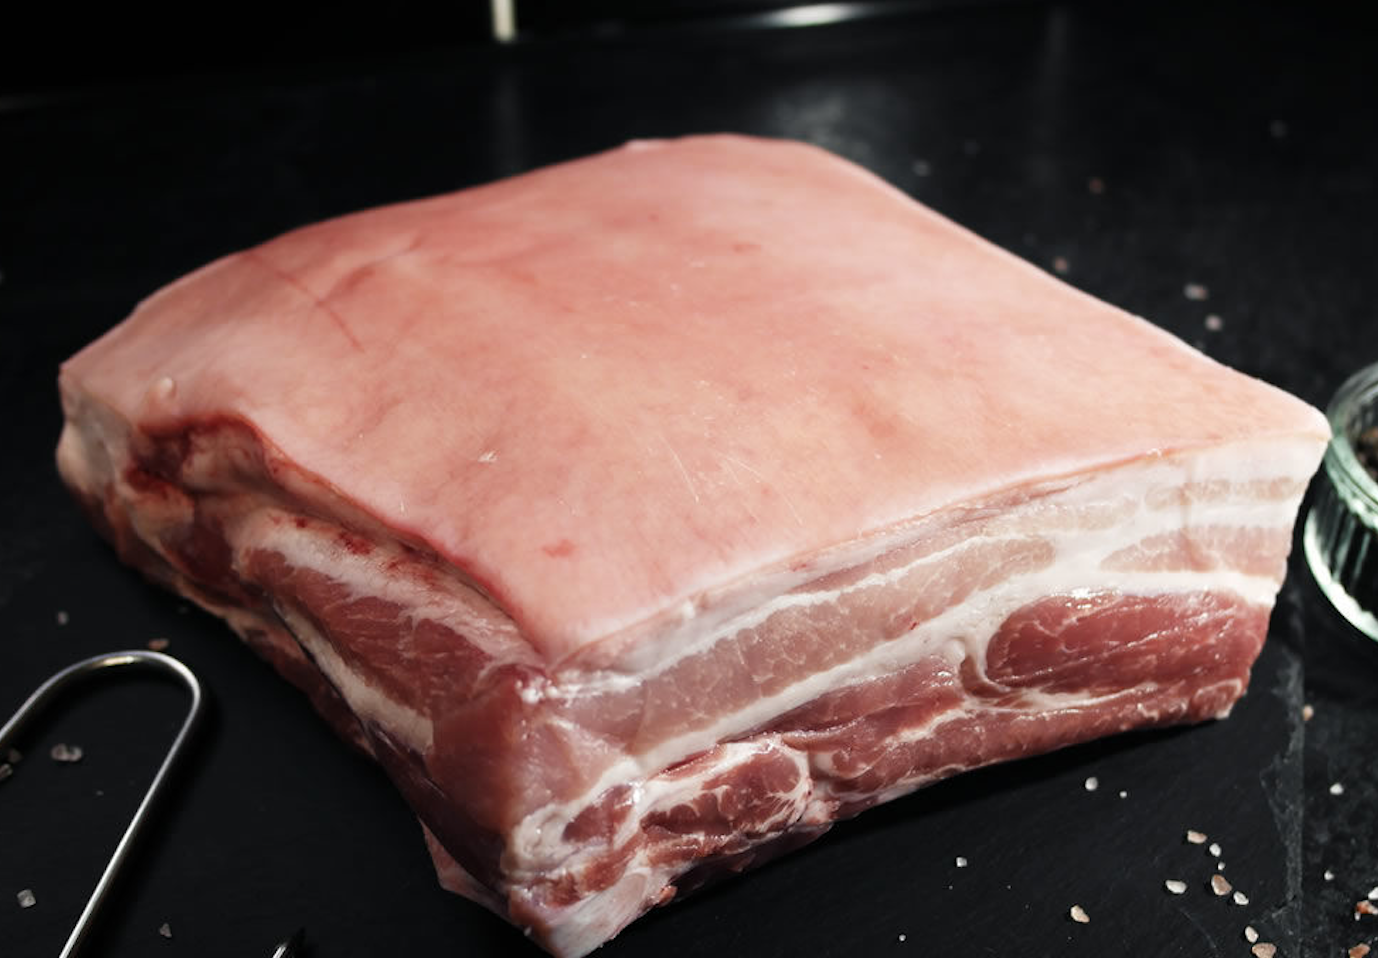 Pork belly is a fattier cut of meat with more nutrition calories than leaner cuts but because of its richness, a little goes a long way.